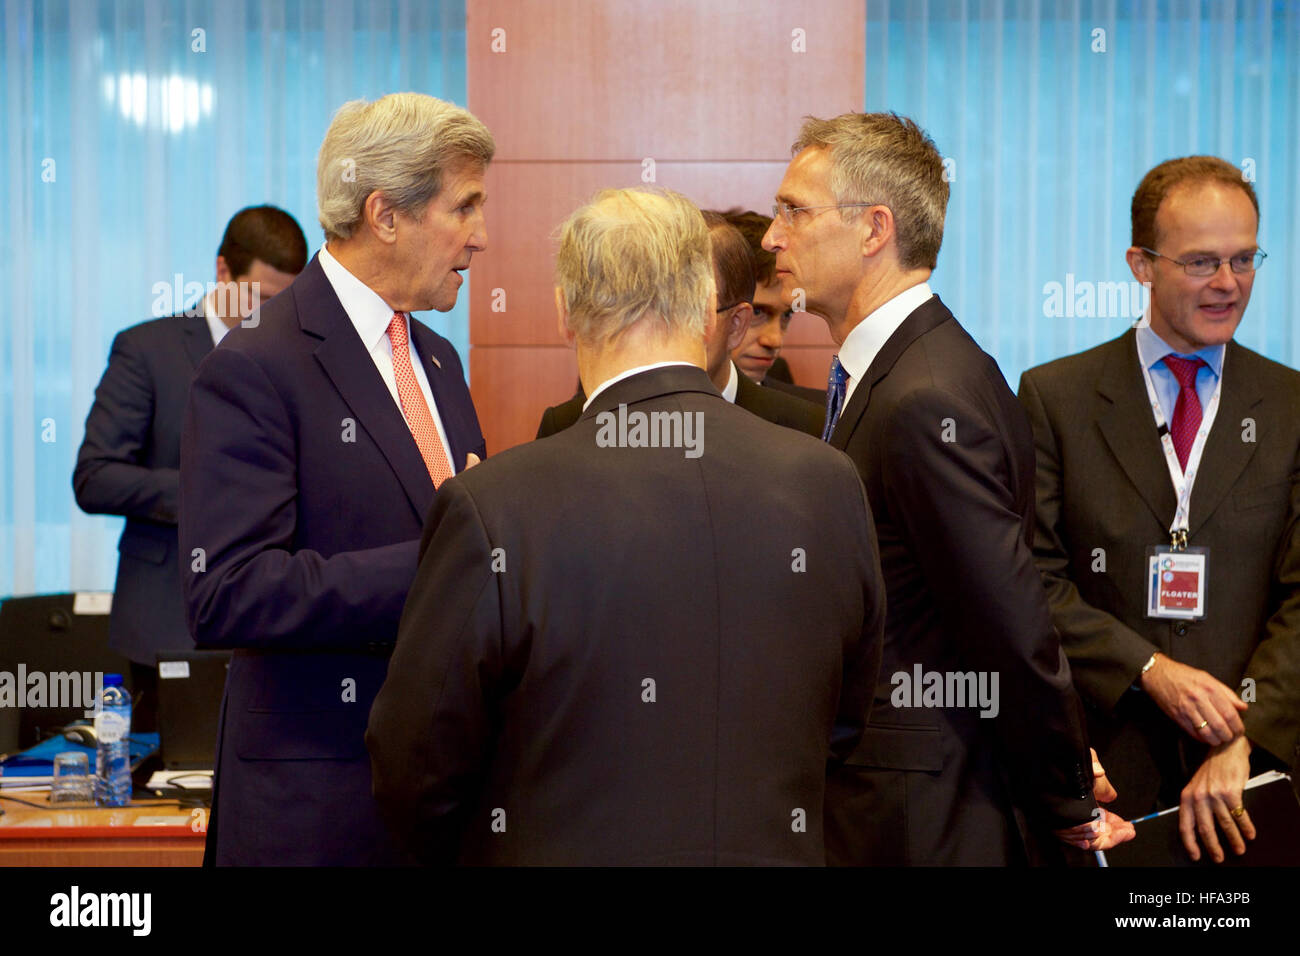 U.S. Secretary of State John Kerry chats with NATO Secretary General Jens Stoltenberg on October 5, 2016, at the European Commission's Justus Lipsius Building in Brussels, Belgium, before the start of an international Afghan pledging conference. Stock Photo